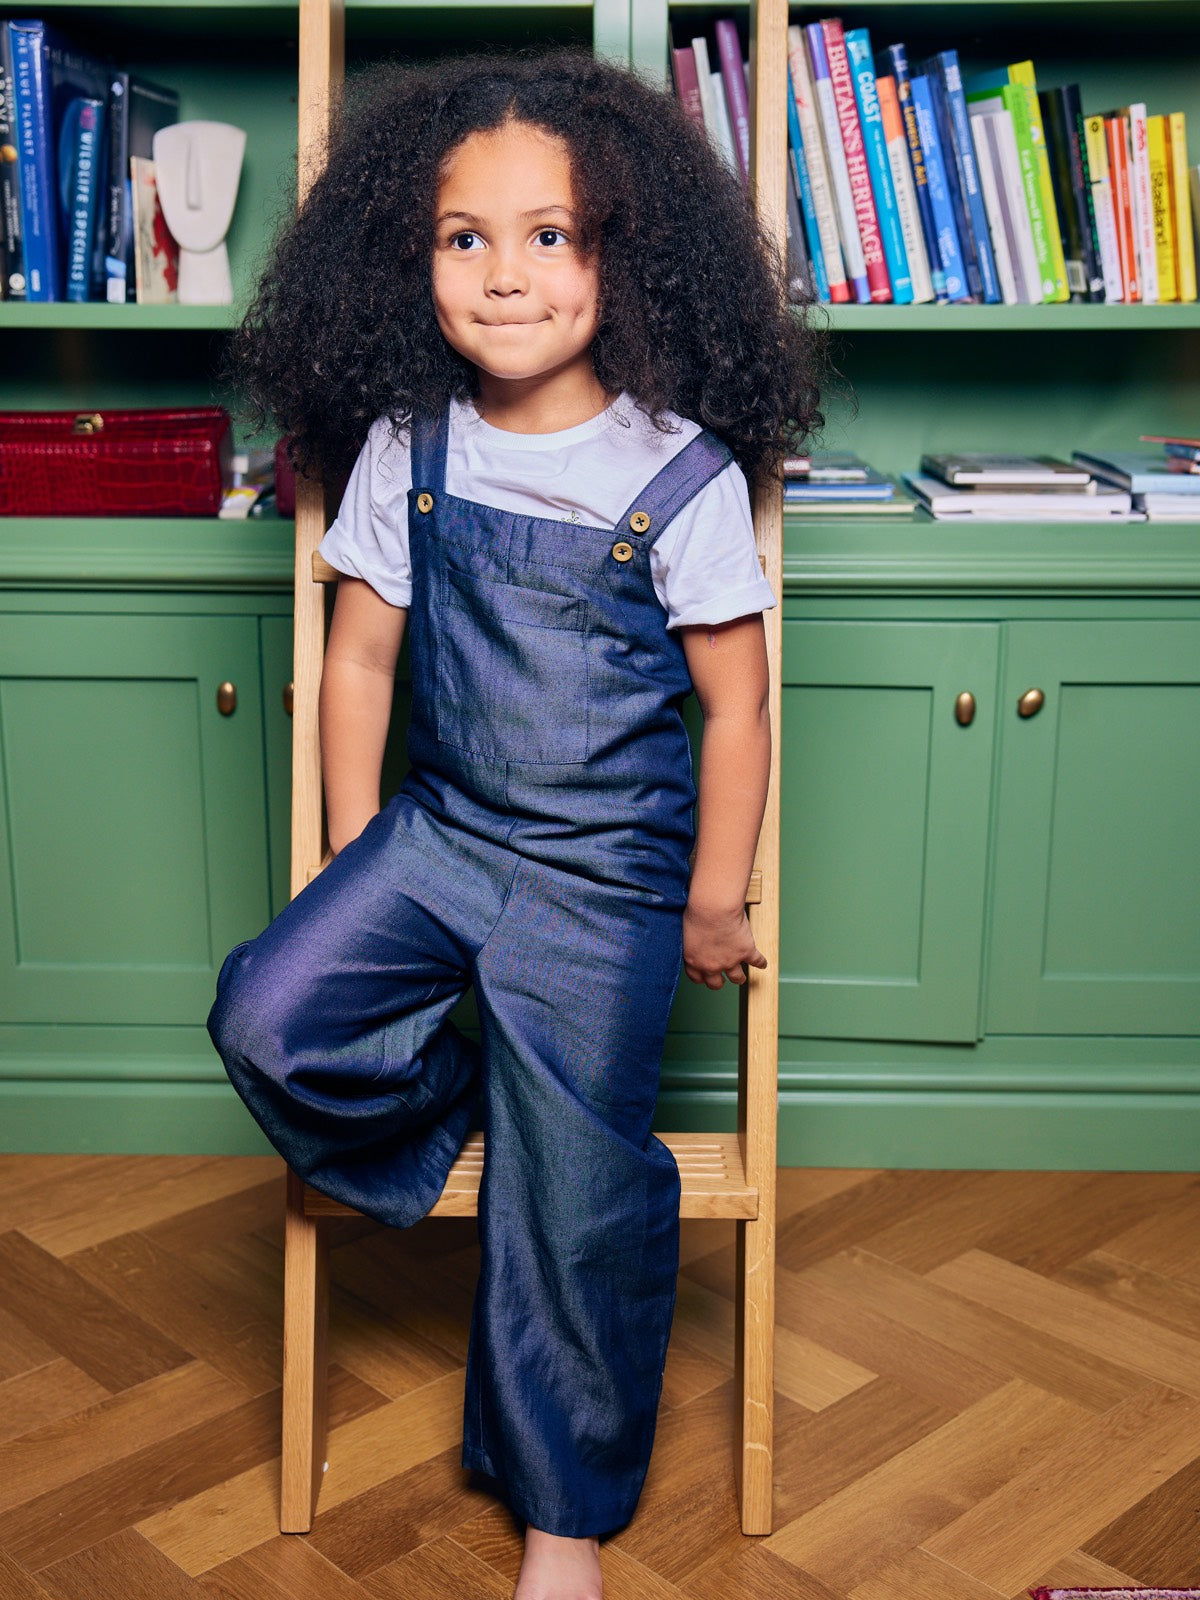 A child wearing the Sofia sustainable kids dungarees, pictured leaning against a ladder in front of a bookshelf.